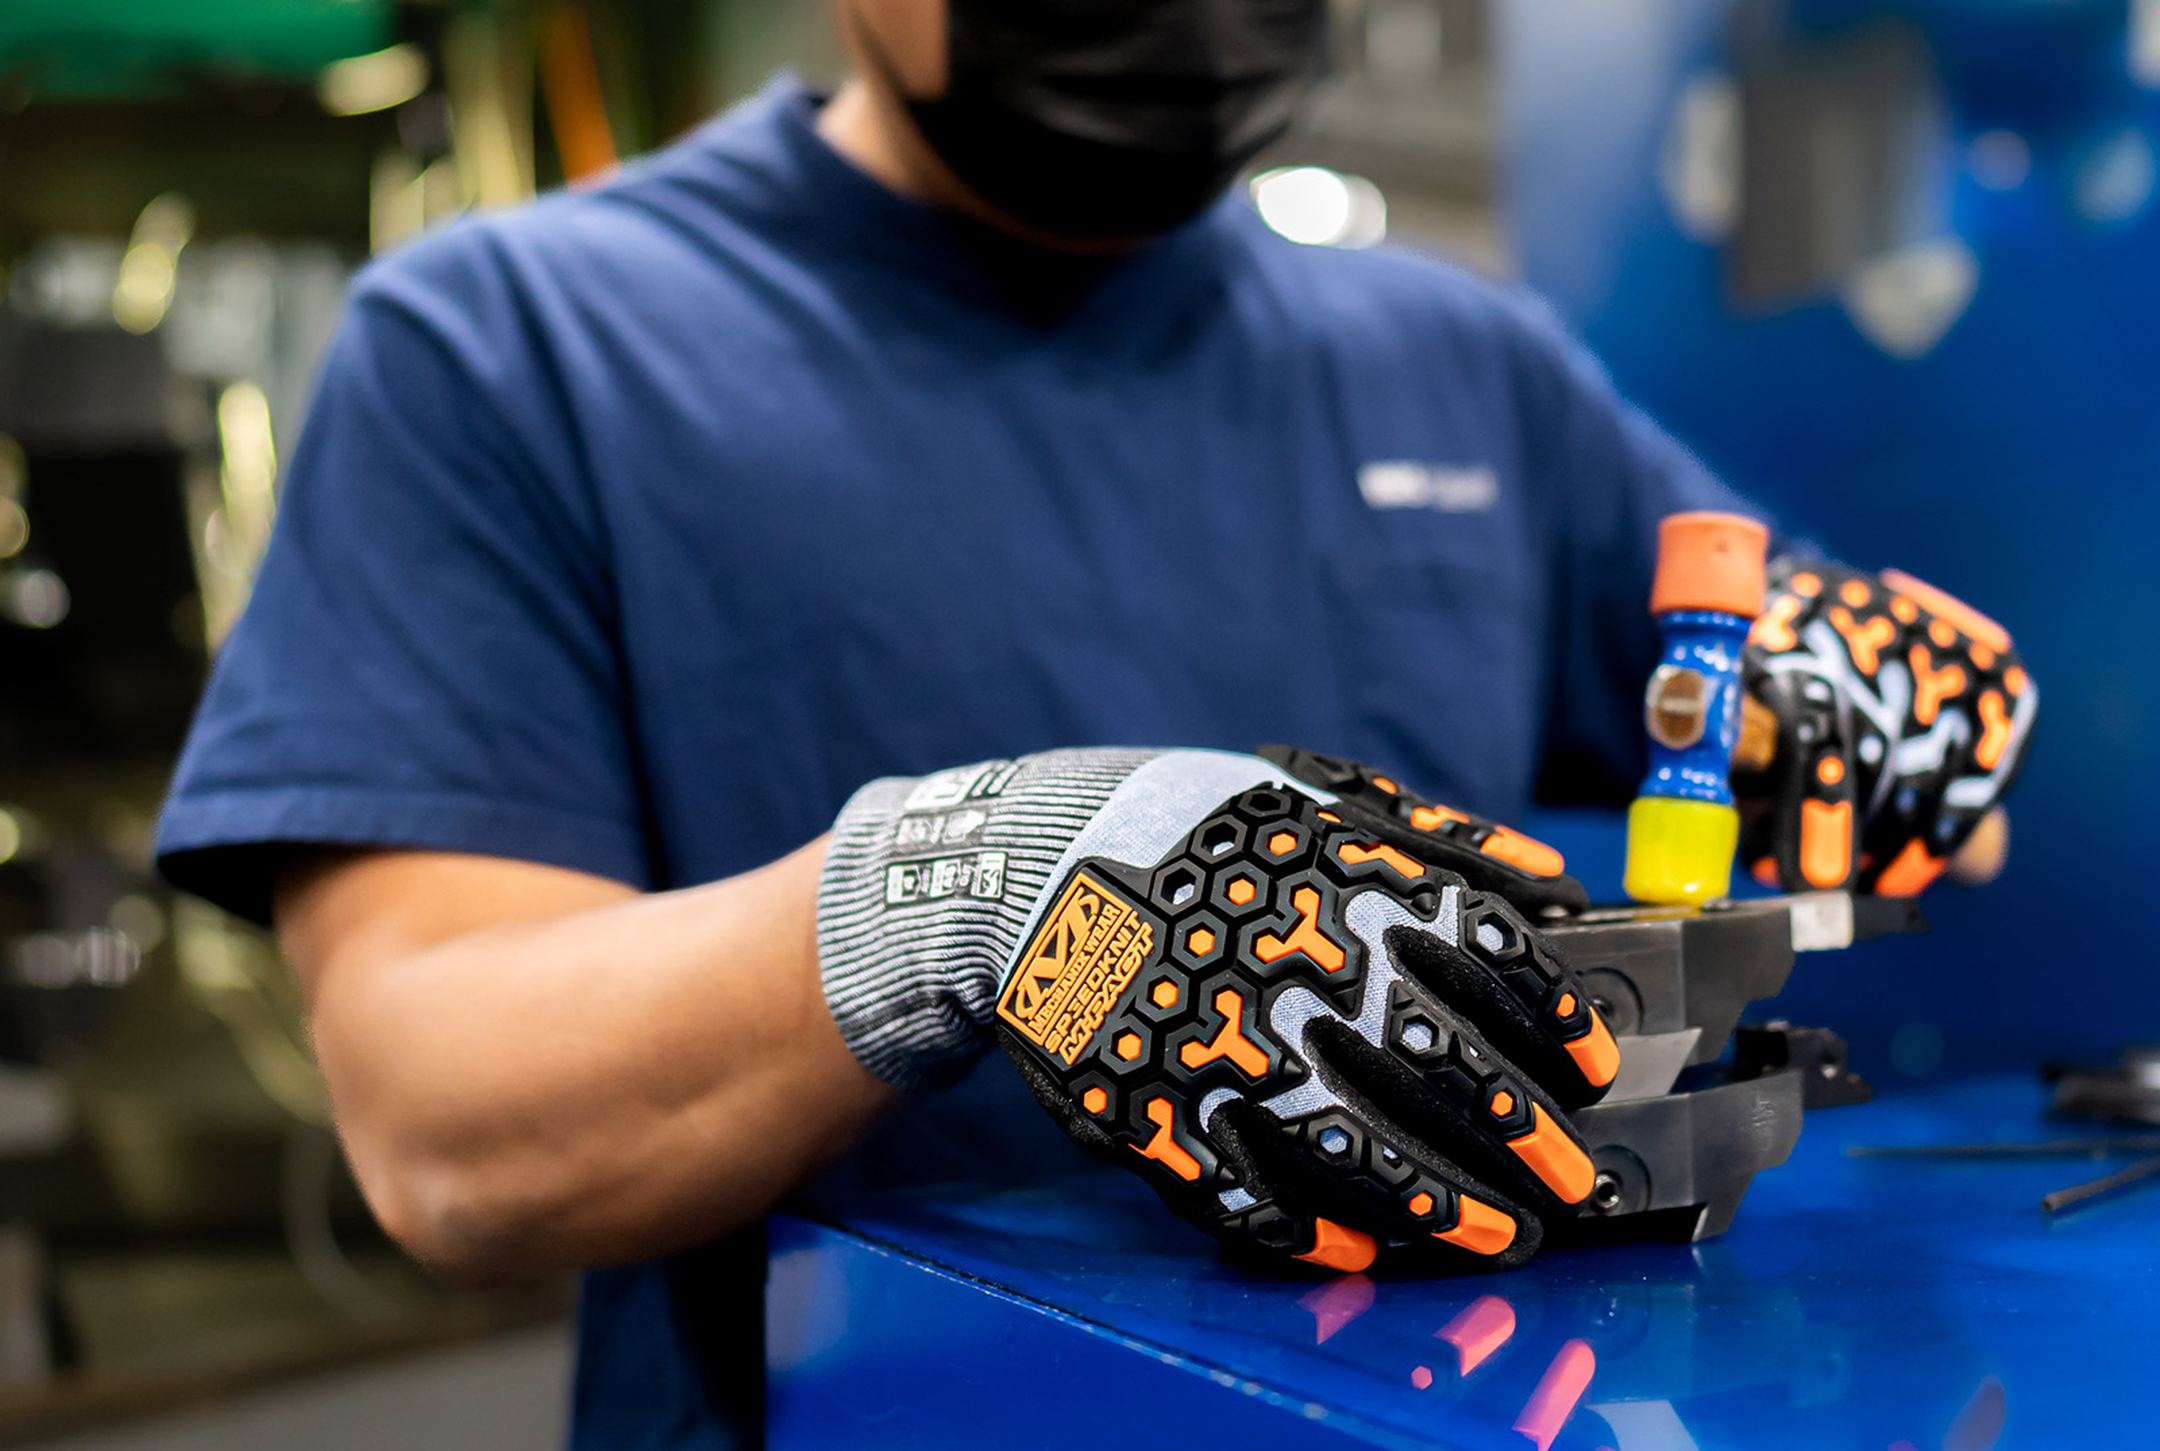 Mechanix Gloves - Trusted Brand for Hands on Work